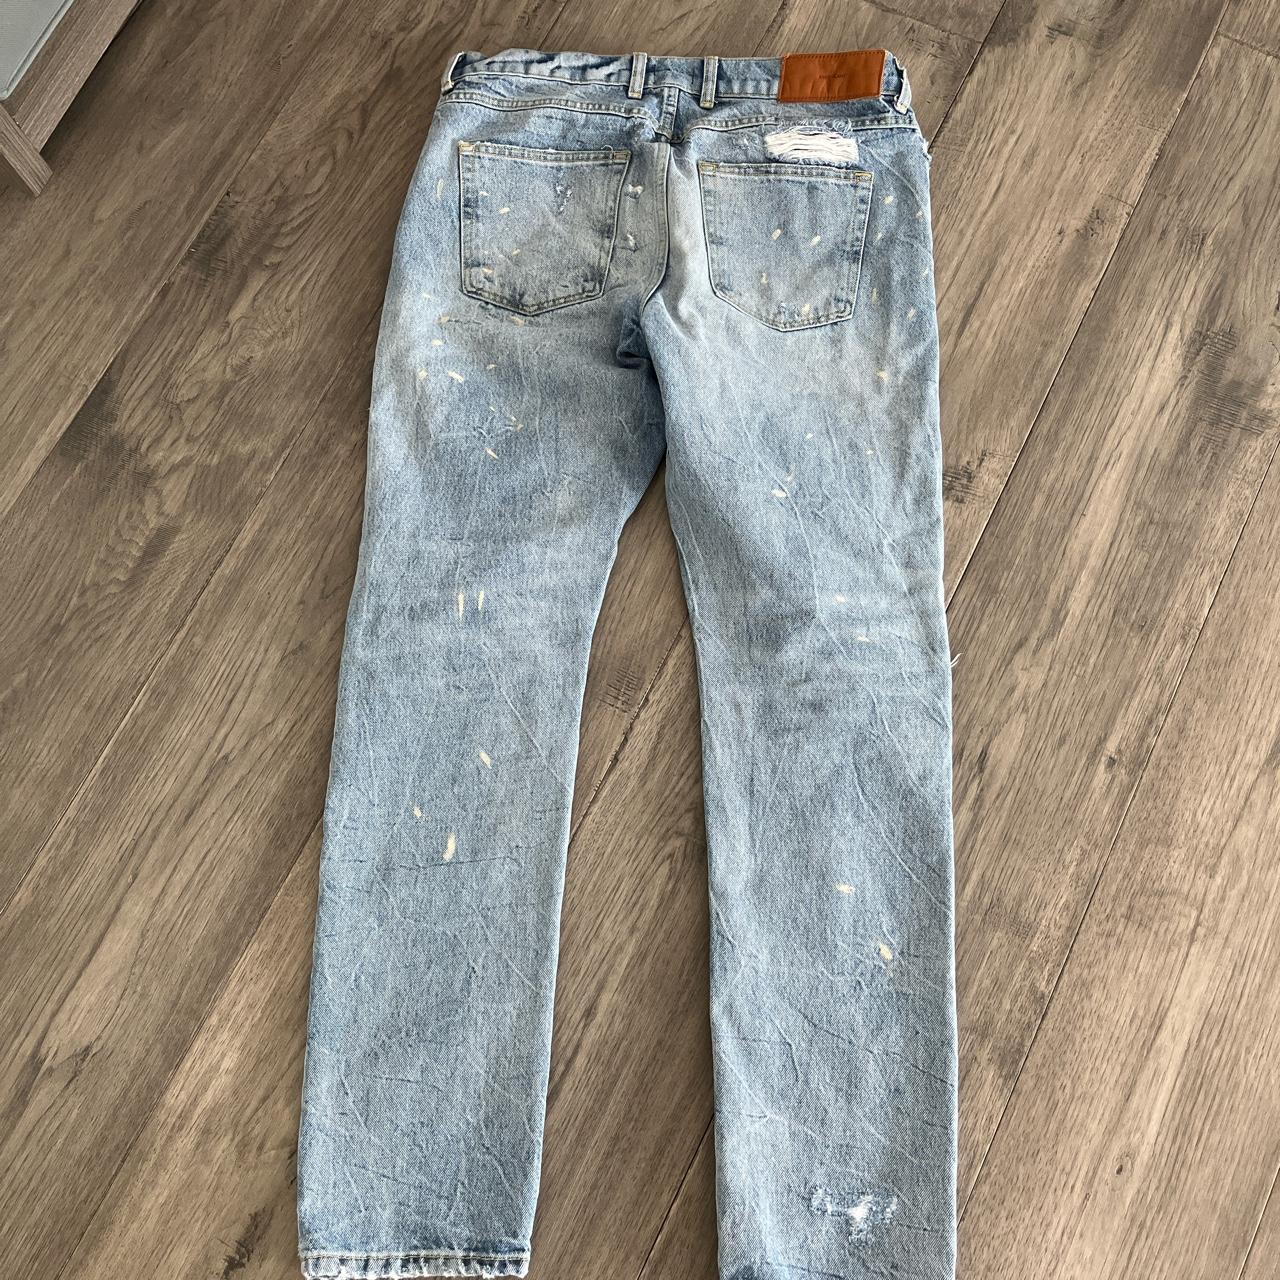 River Island Men's Blue and White Jeans (2)